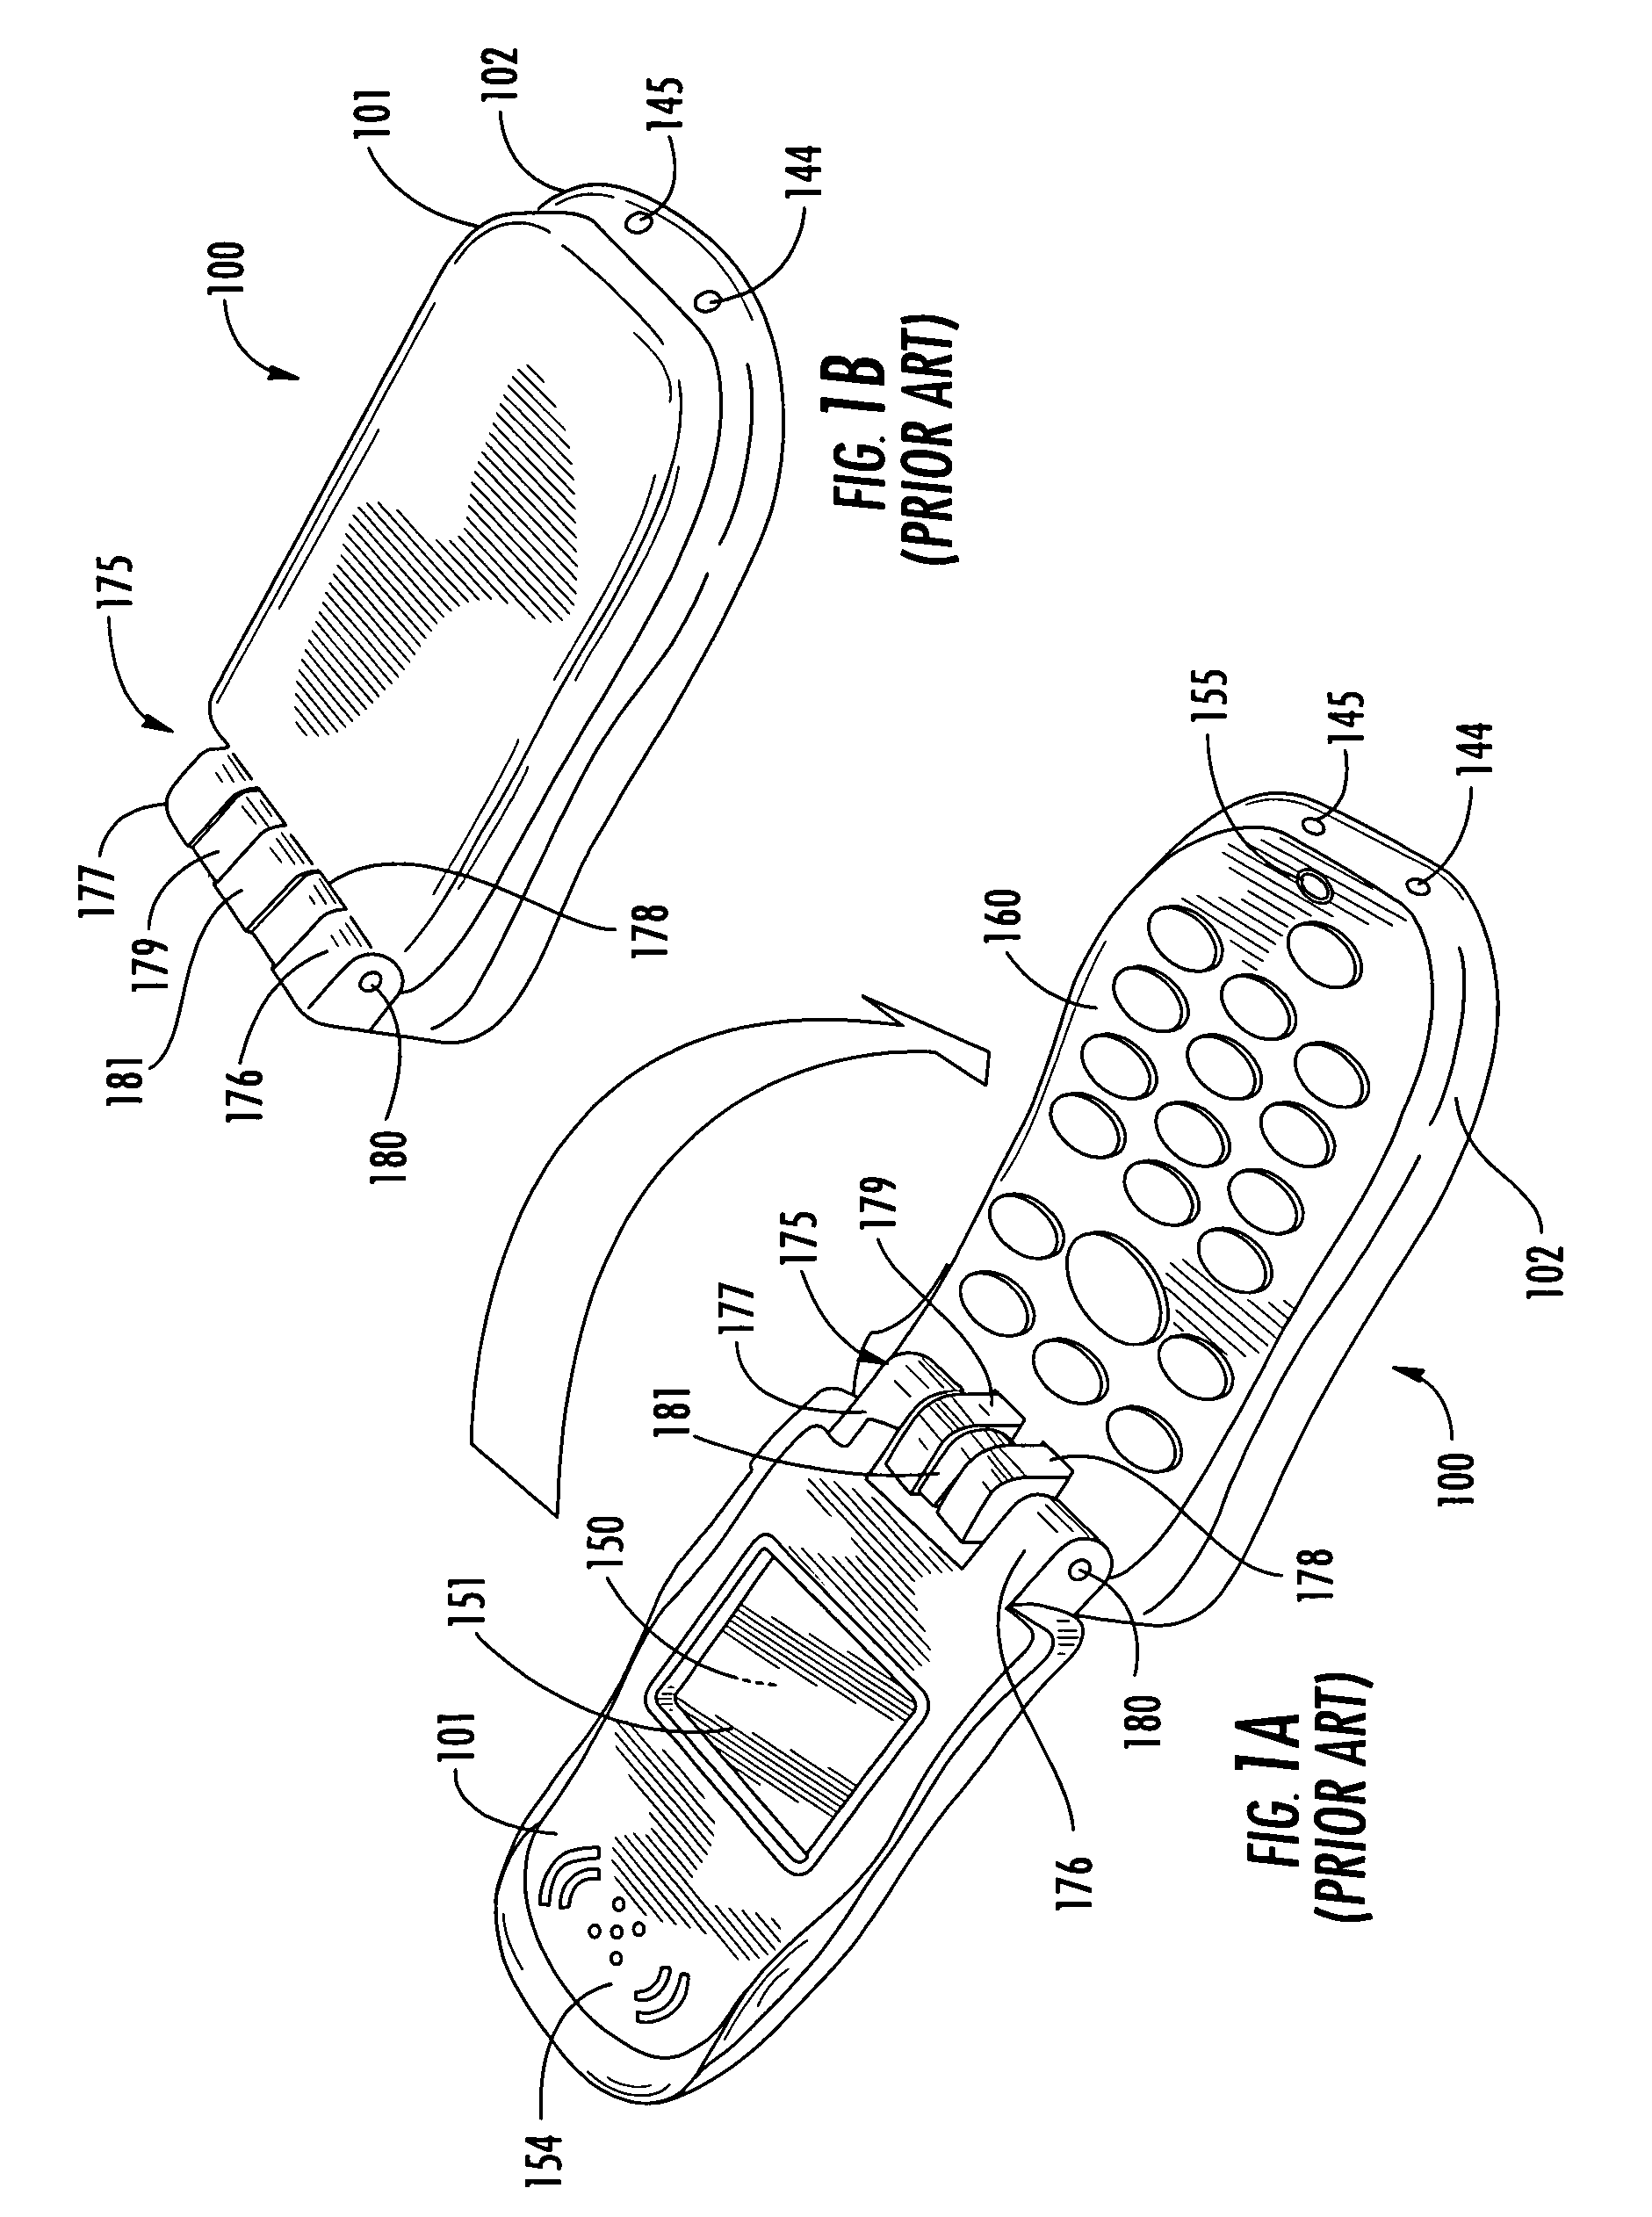 Bi-stable hinge and systems using same